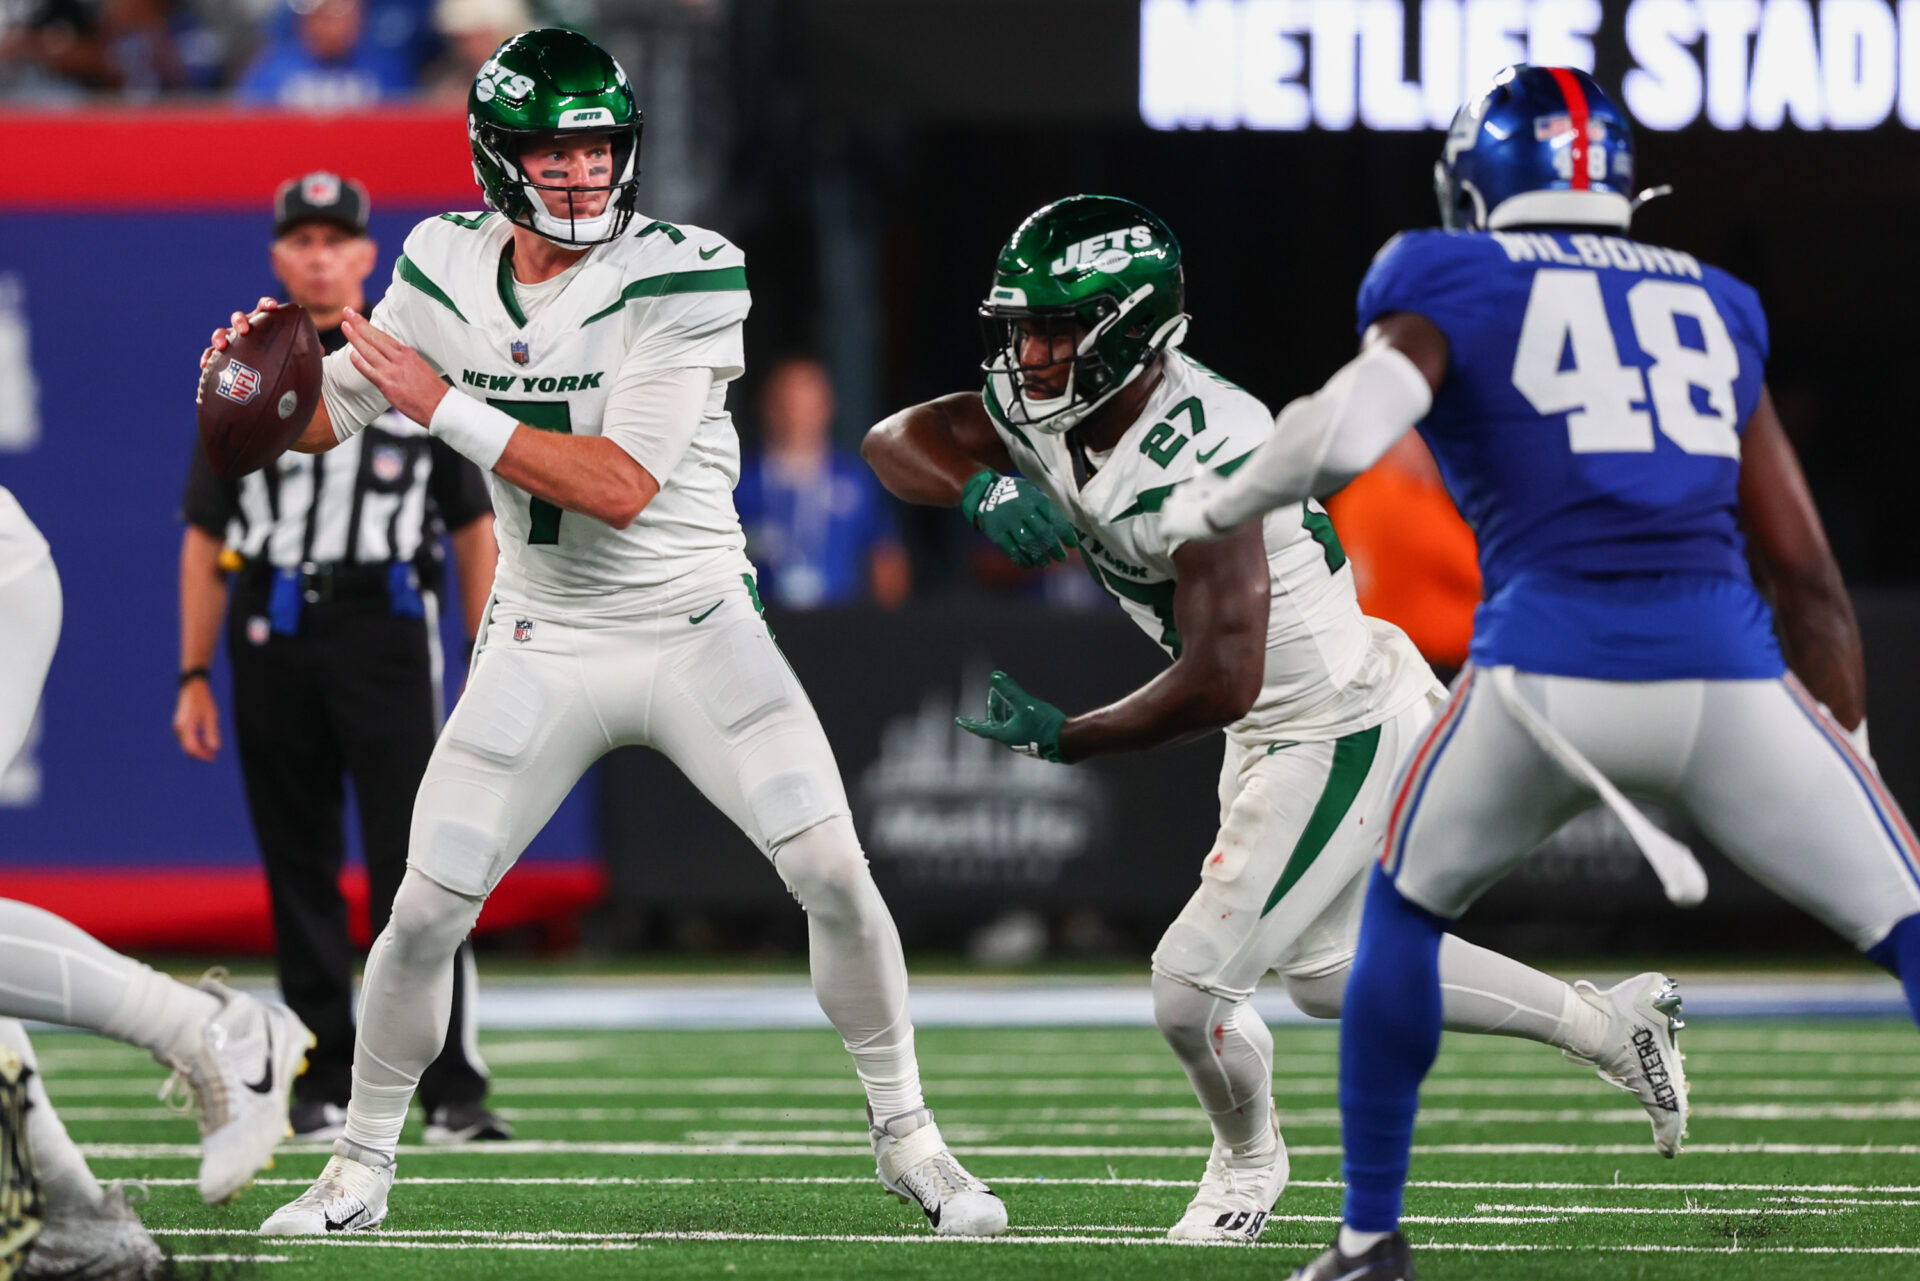 New York Jets quarterback Tim Boyle (7) throws a pass against the New York Giants during the second half at MetLife Stadium.